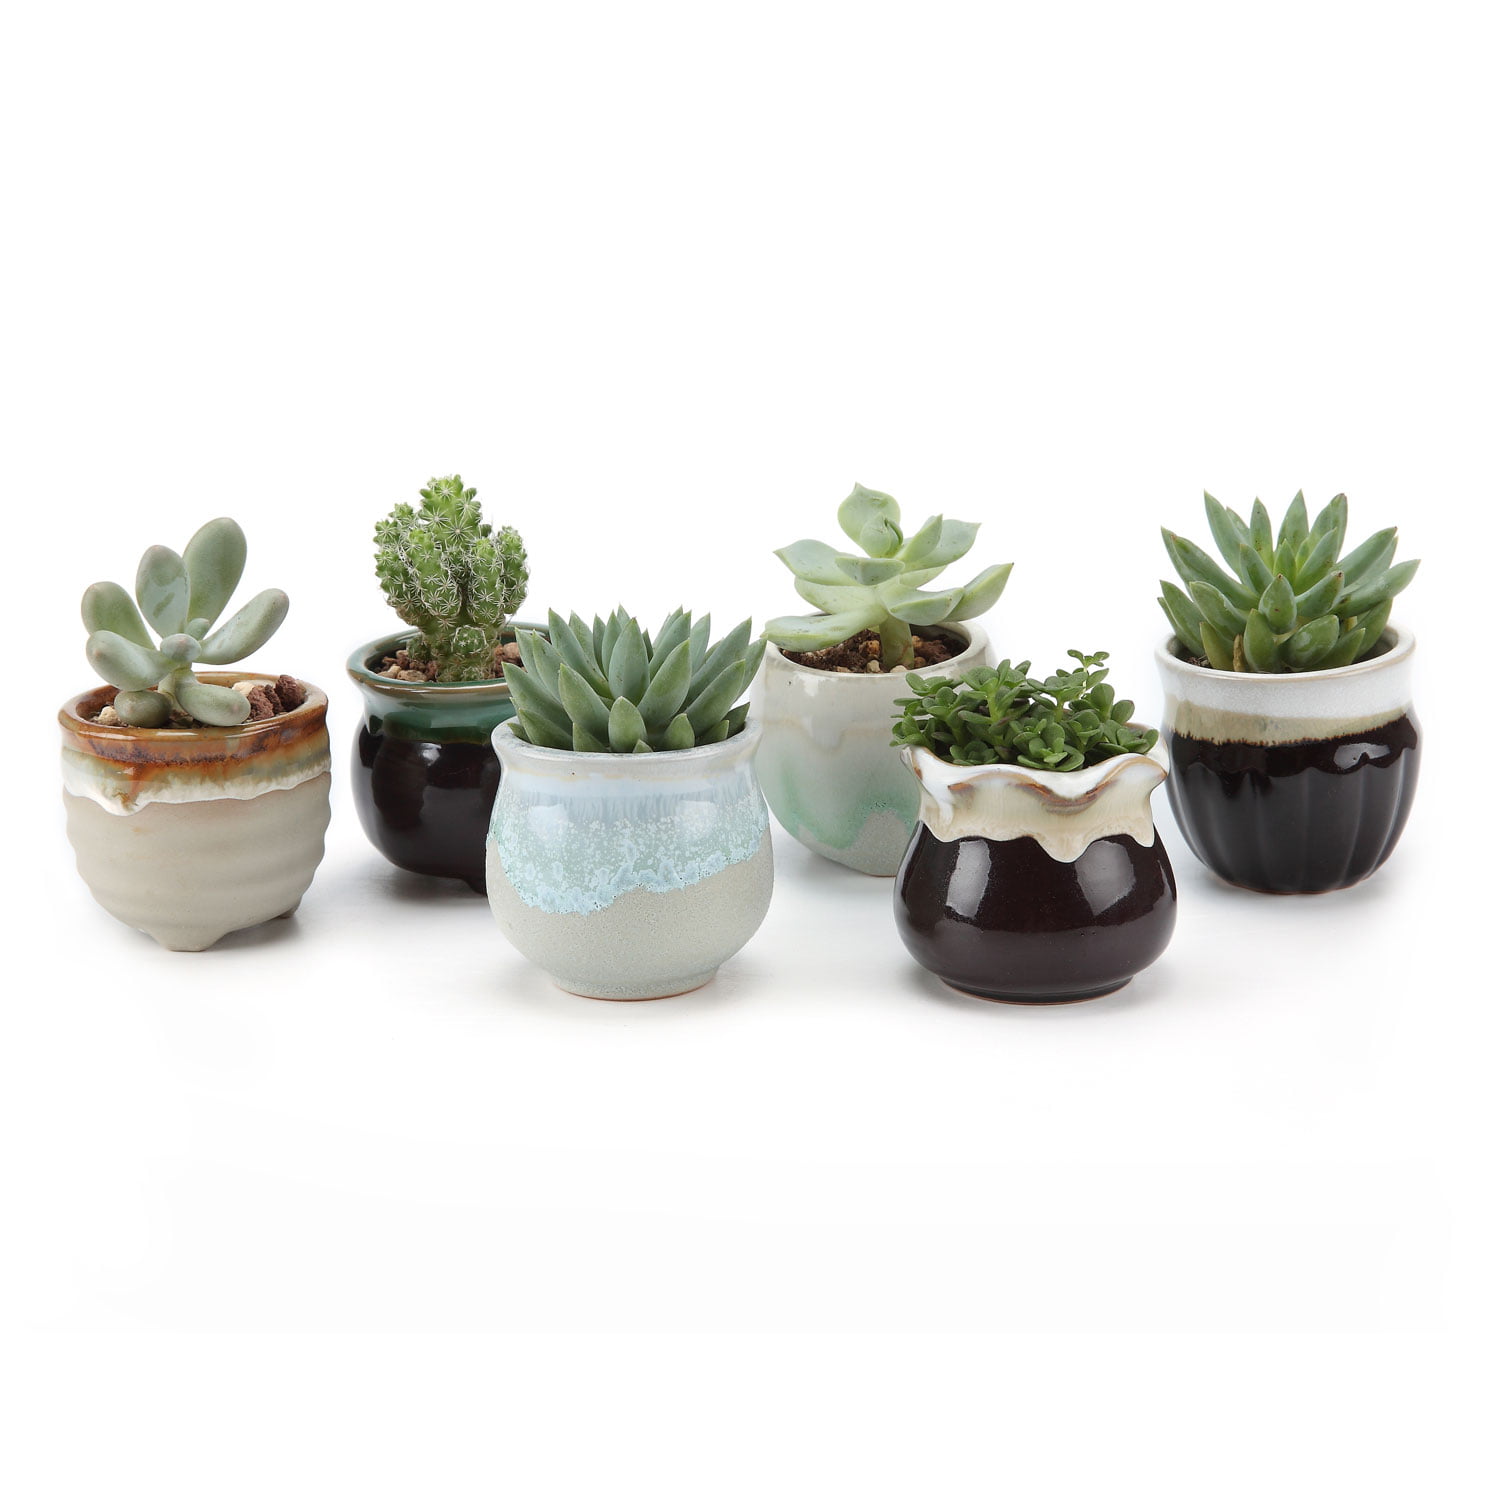 ZOUTOG 12 Pack Succulent Pots, 2.6 Inch Mini Ceramic Pots for Flower or  Cactus with Drainage Hole, Small Pots for Plants, Plants Not Included